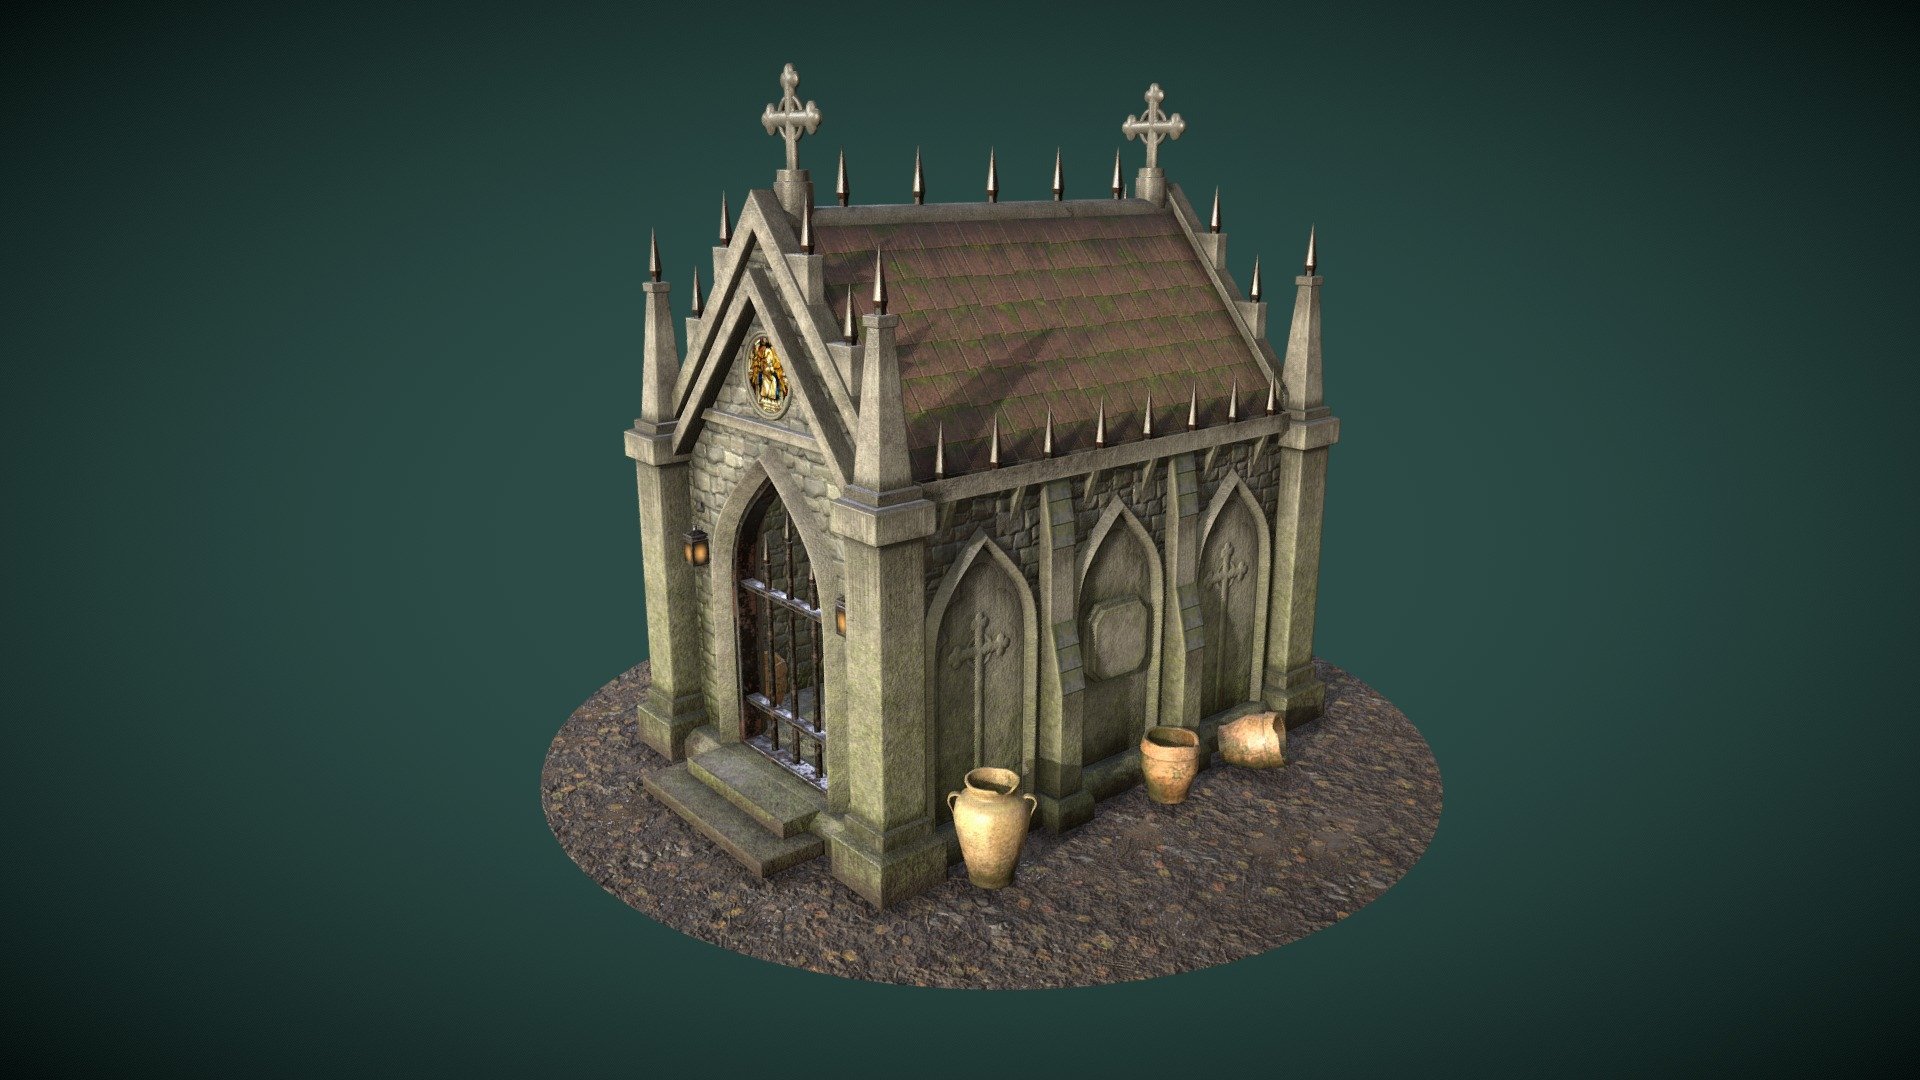 A Gothic Mausoleum inspired by mausoleums in London cemeteries. This was modeled in Maya and textured using Substance Painter 3d model